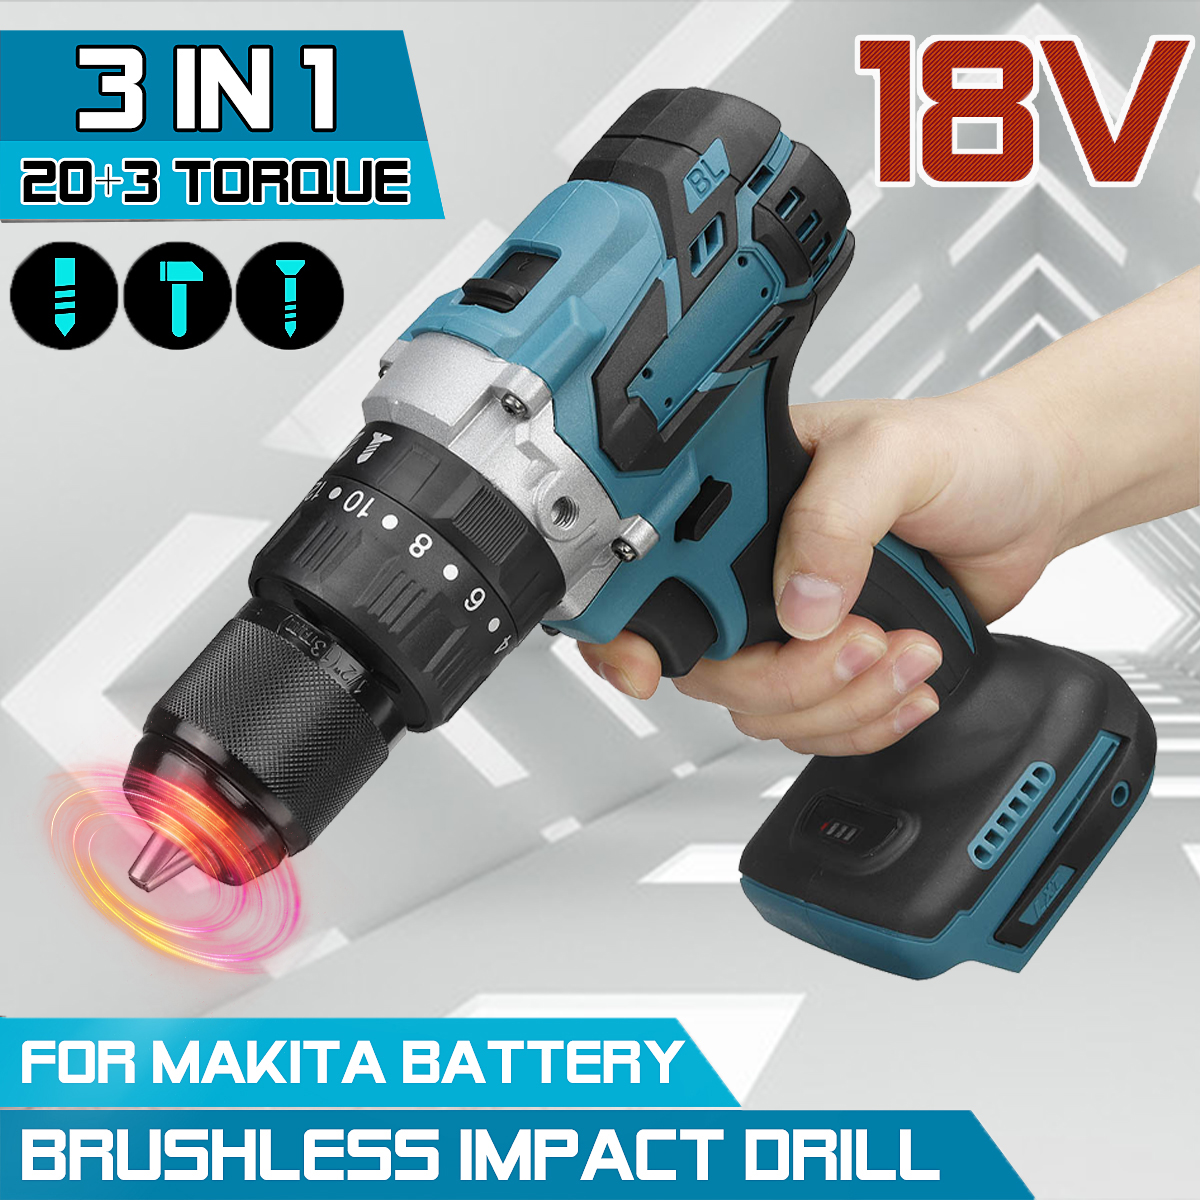 3-in-1-520Nm-Brushless-Cordless-Compact-Impact-Combi-Drill-Driver-For-Makita-18V-Battery-1784978-1